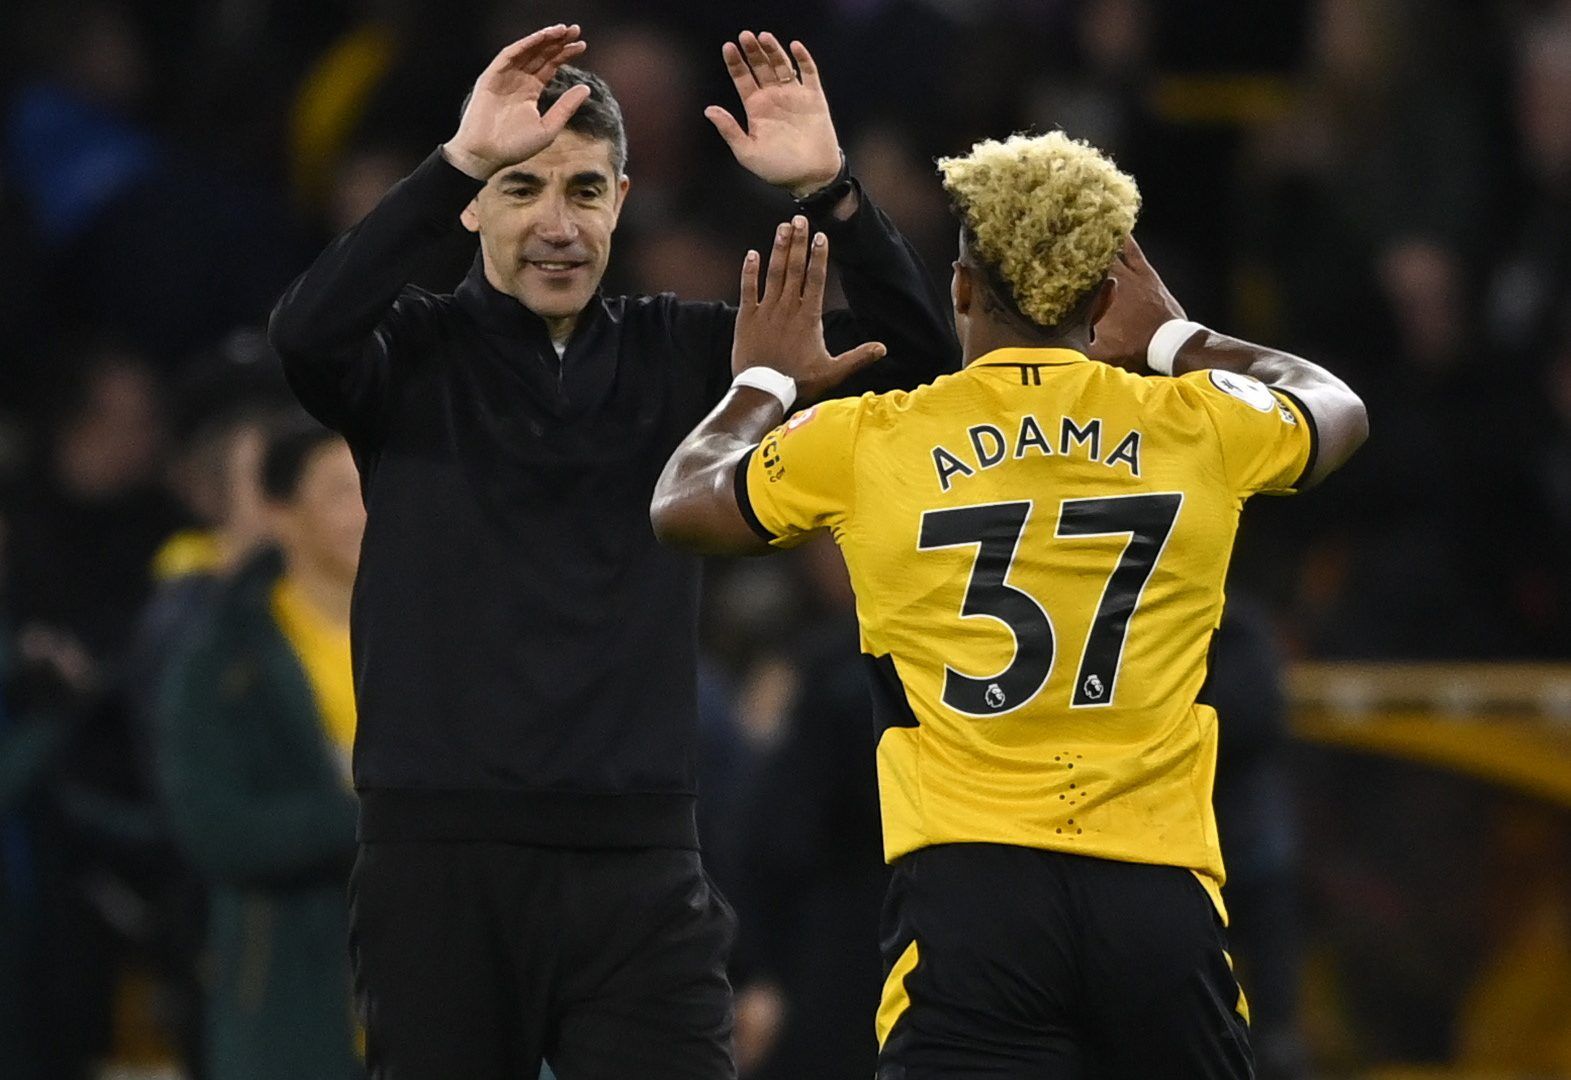 Soccer Football - Premier League - Wolverhampton Wanderers v West Ham United - Molineux Stadium, Wolverhampton, Britain - November 20, 2021  Wolverhampton Wanderers manager Bruno Lage celebrates with Adama Traore after the match REUTERS/Tony Obrien EDITORIAL USE ONLY. No use with unauthorized audio, video, data, fixture lists, club/league logos or 'live' services. Online in-match use limited to 75 images, no video emulation. No use in betting, games or single club /league/player publications.  P